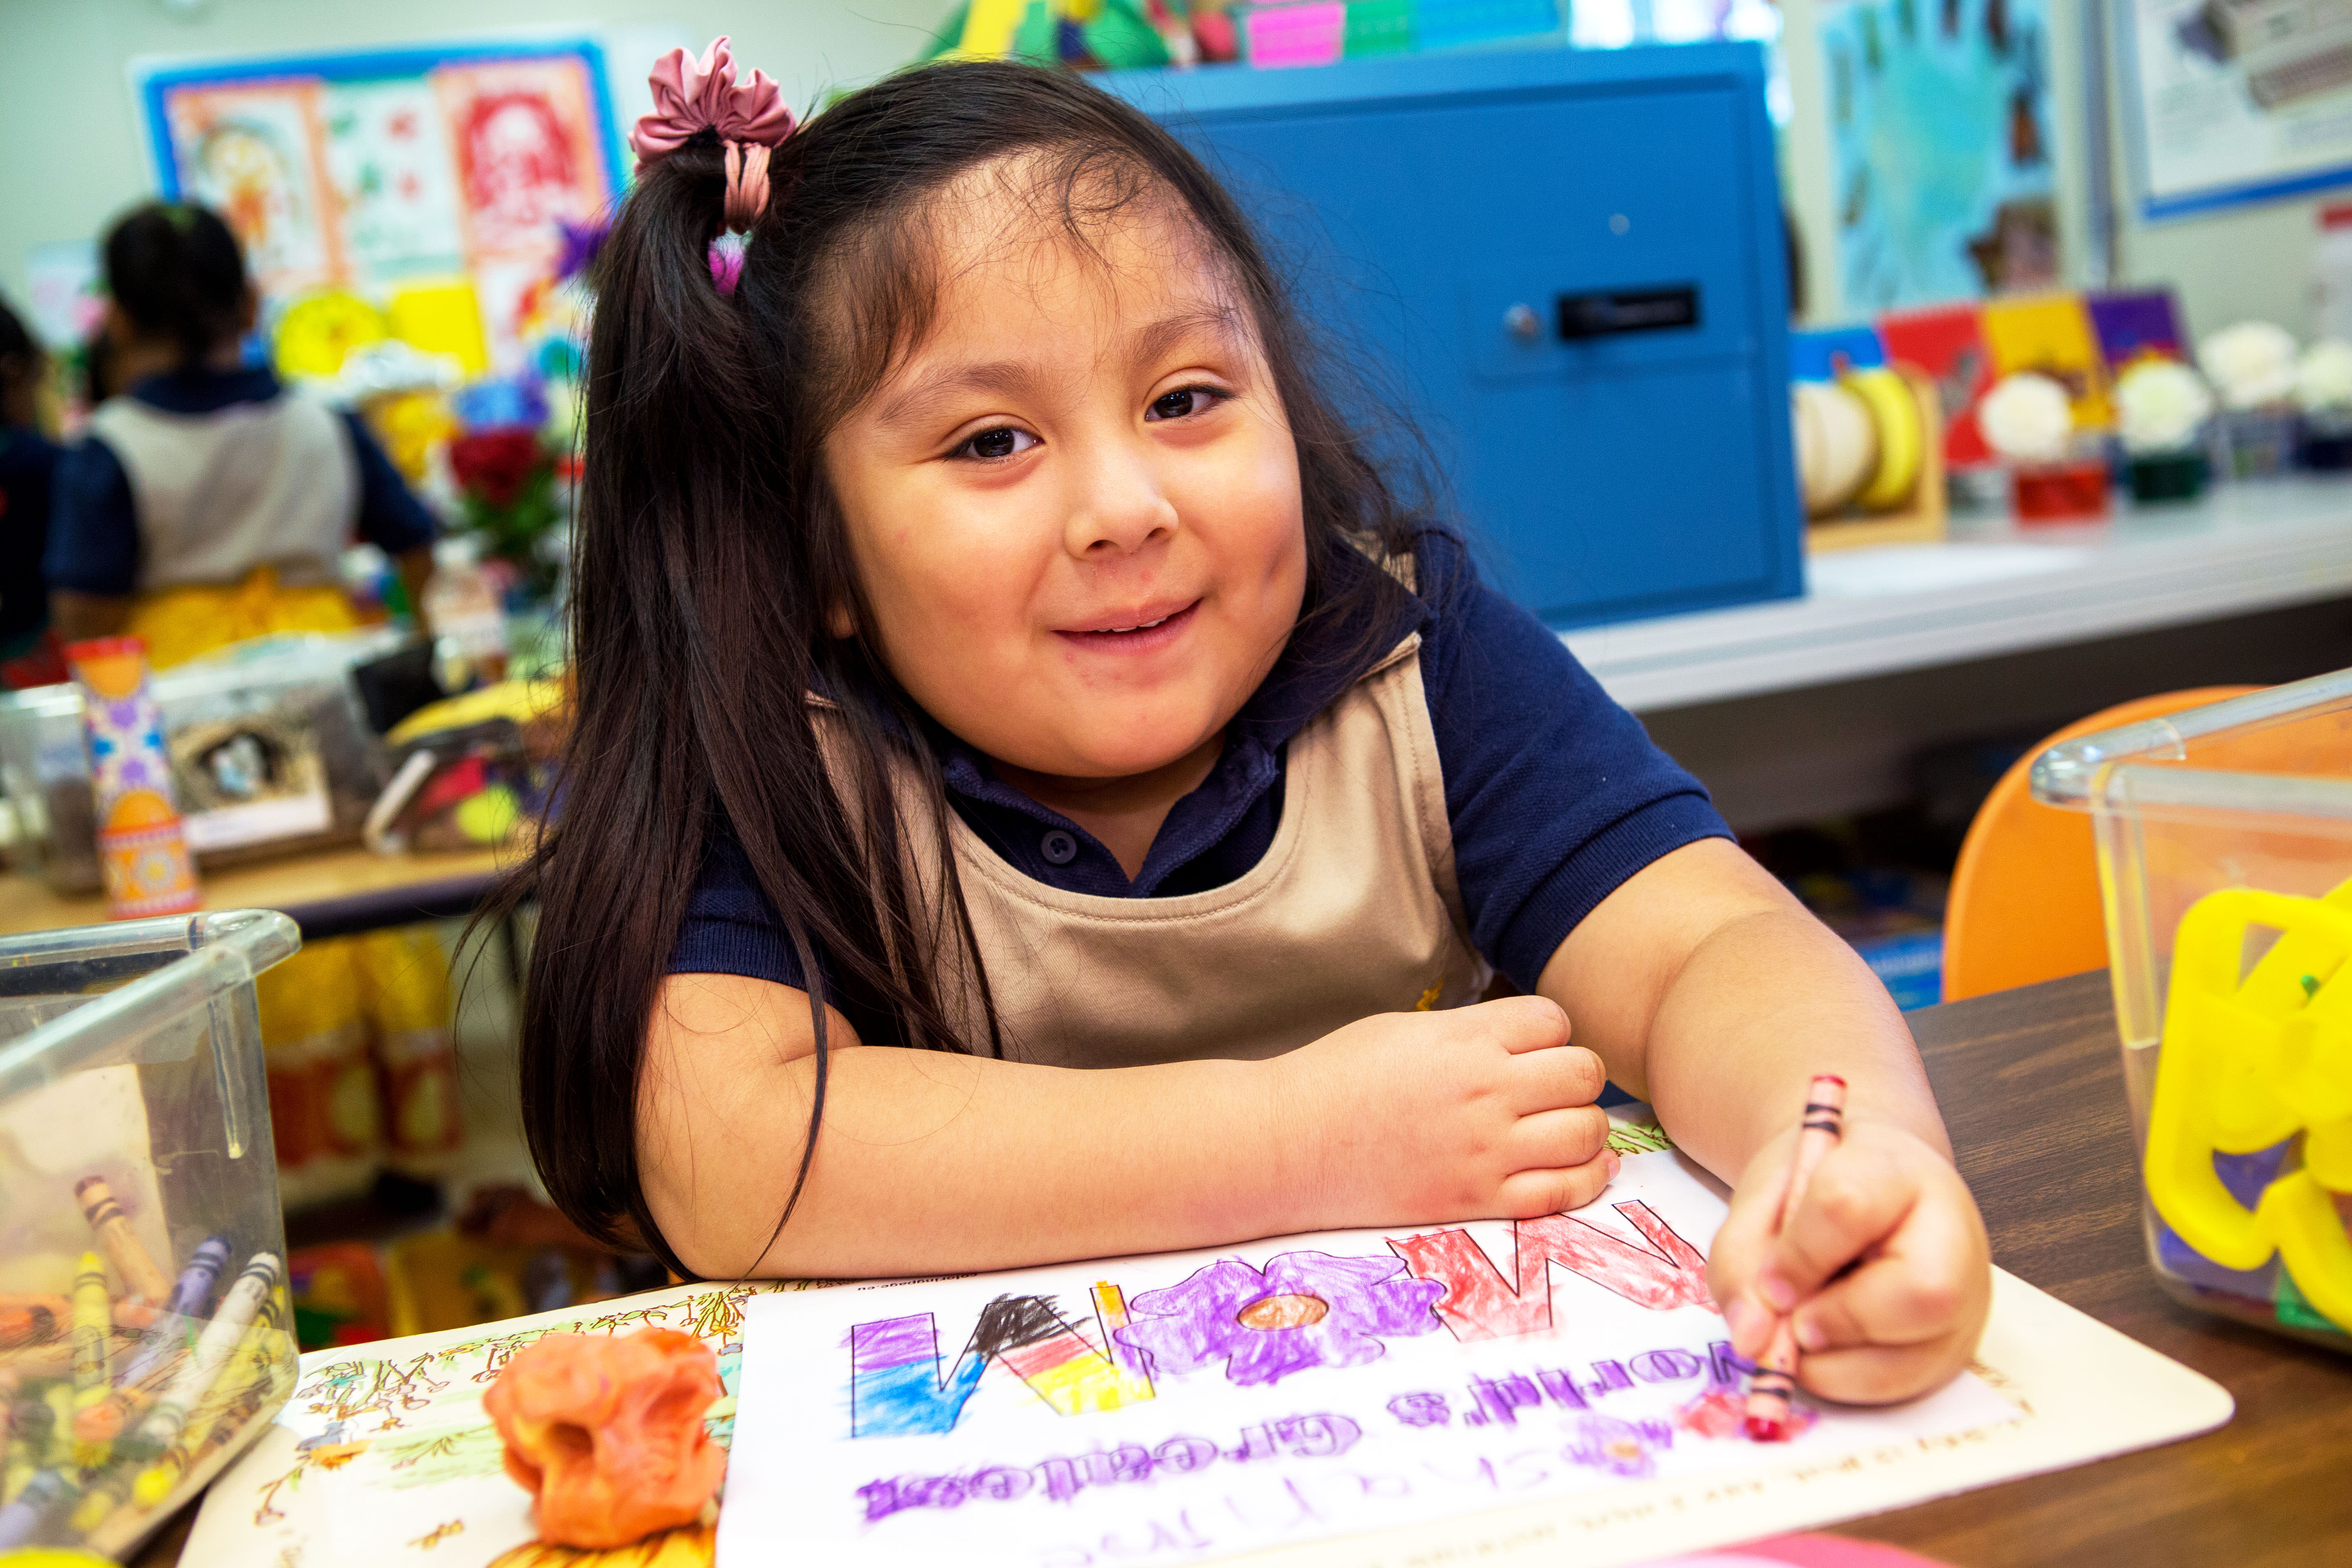 New Grant from US Dept. of Education to Transform Pre-School Education